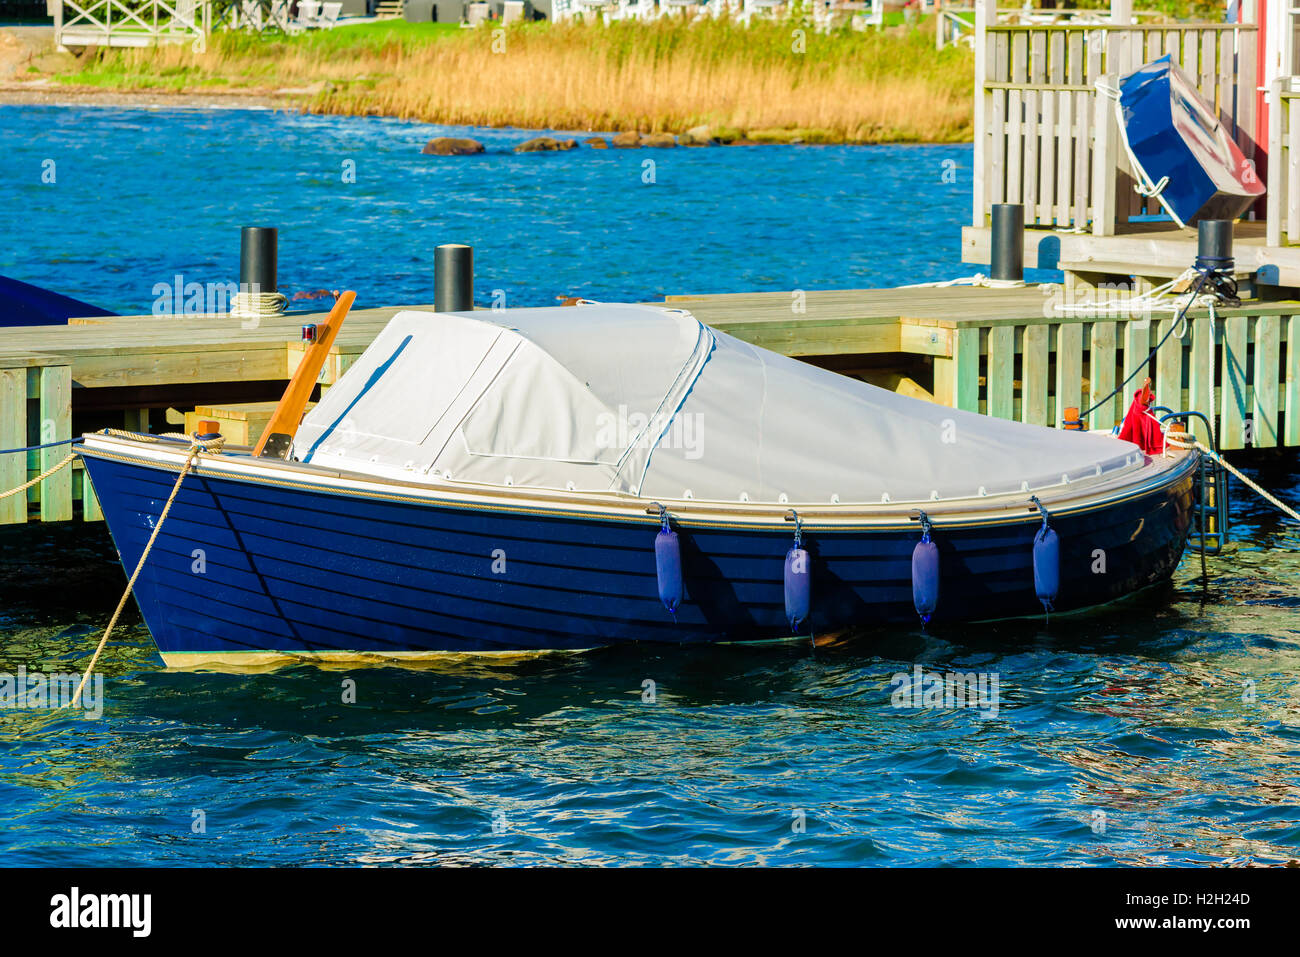 Blue motorboat covered with tarp, moored by a wooden pier. Stock Photo